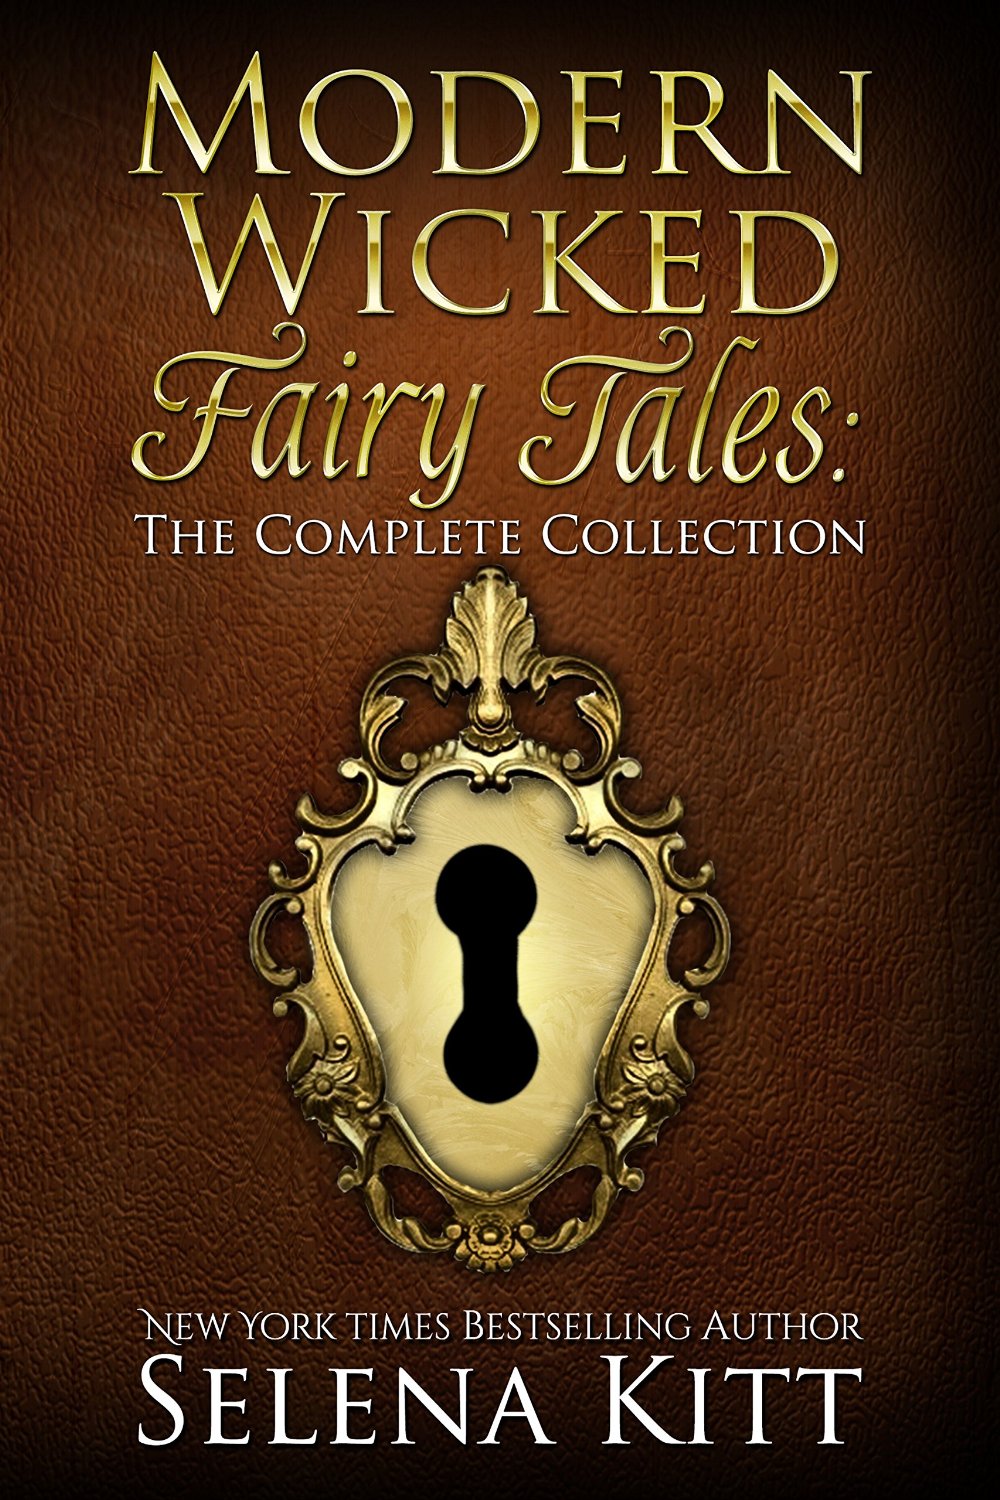 Modern Wicked Fairy Tales: Complete Collection by Selena Kitt